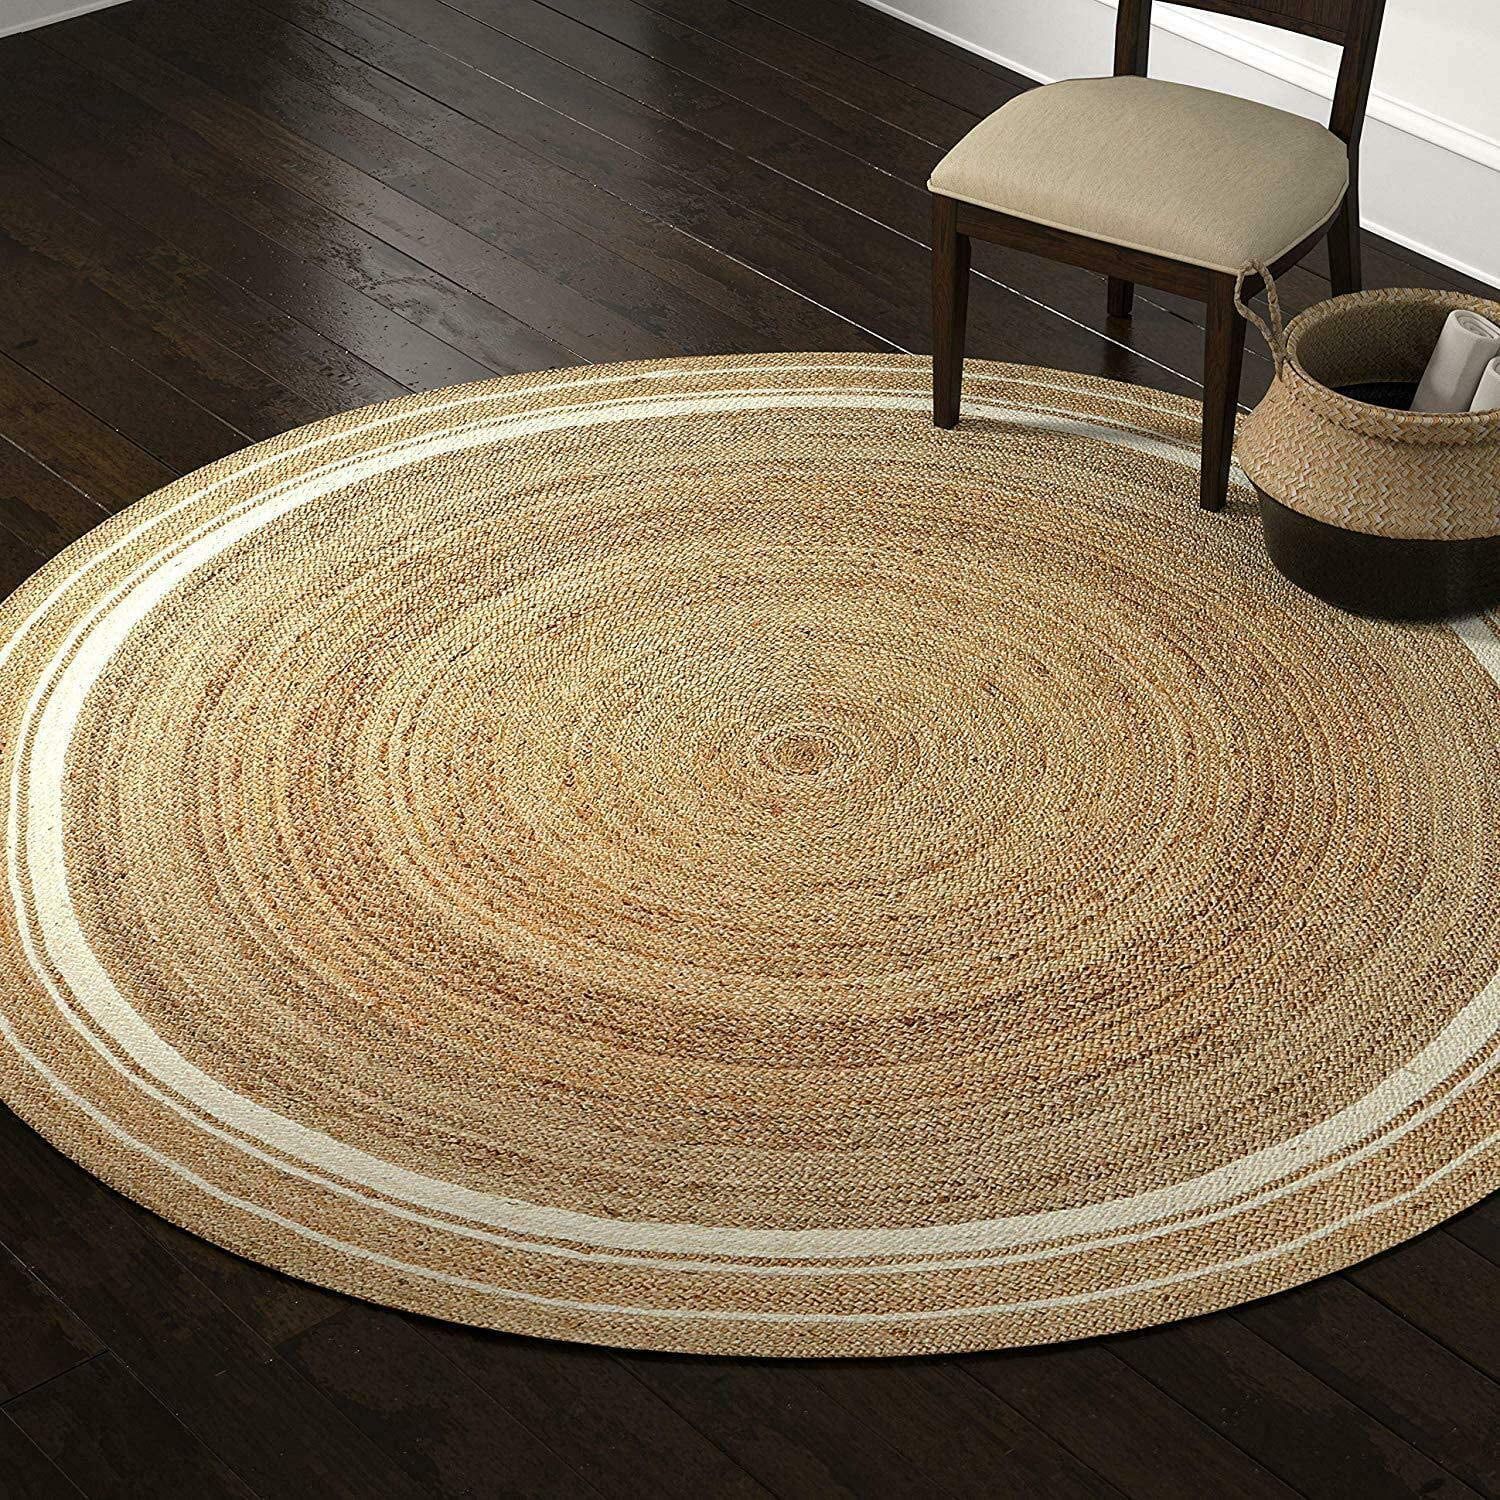 White Border Handmade Hand Woven Boho Braided Jute Area Rug Natural Fibers Round  Rugs For Living Room, Kitchen, Indoor & Outdoor Carpet  2” Feet (24 Inch) –  Walmart With Border Round Rugs (Photo 12 of 15)